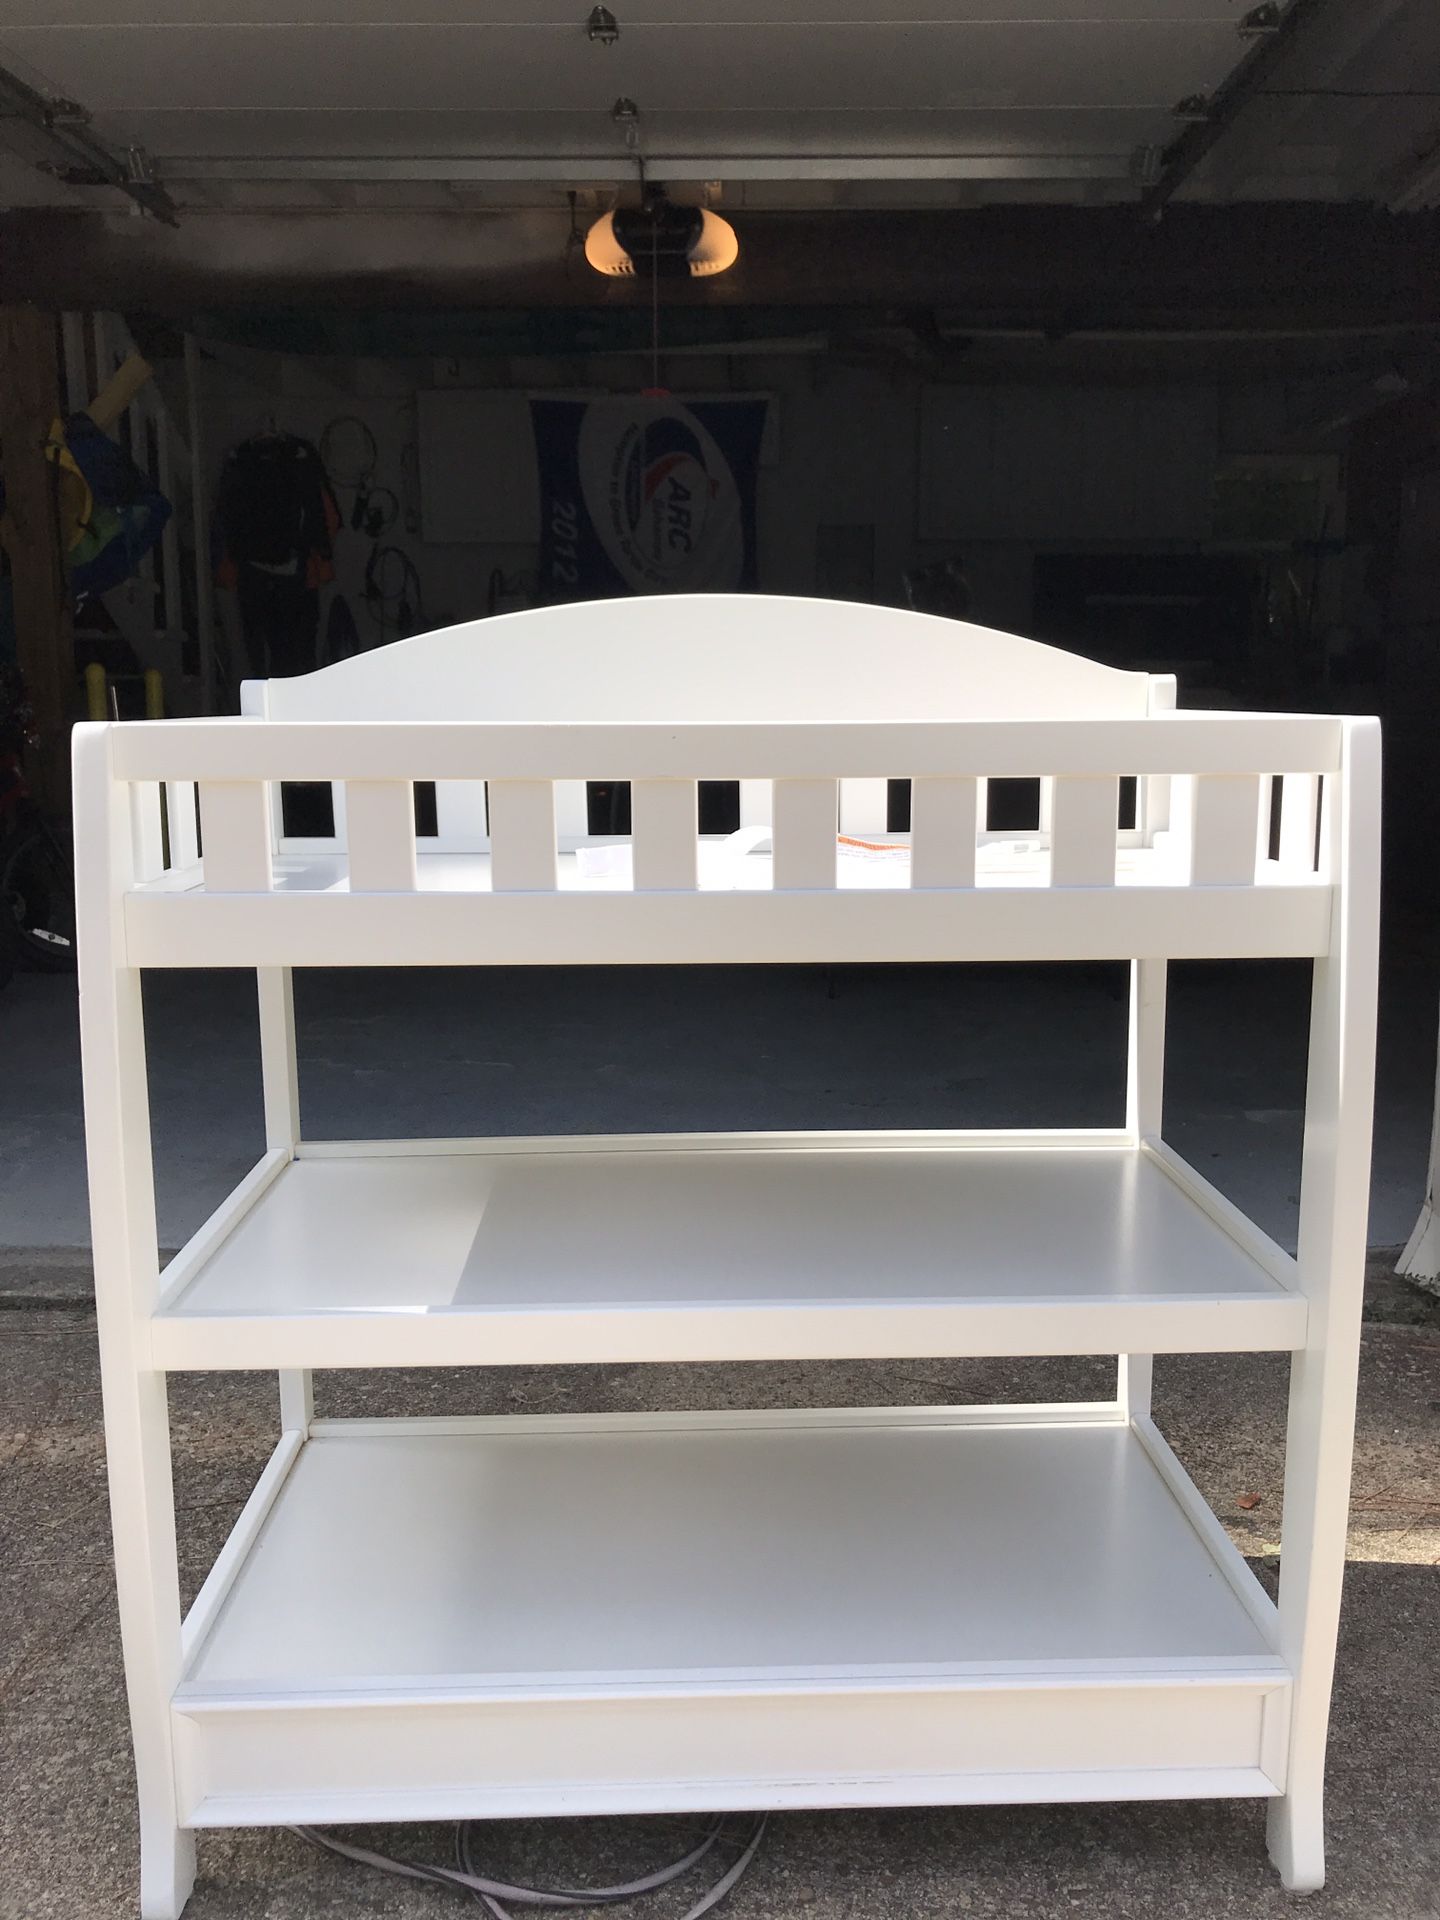 $25 baby changing table MUST GO TODAY